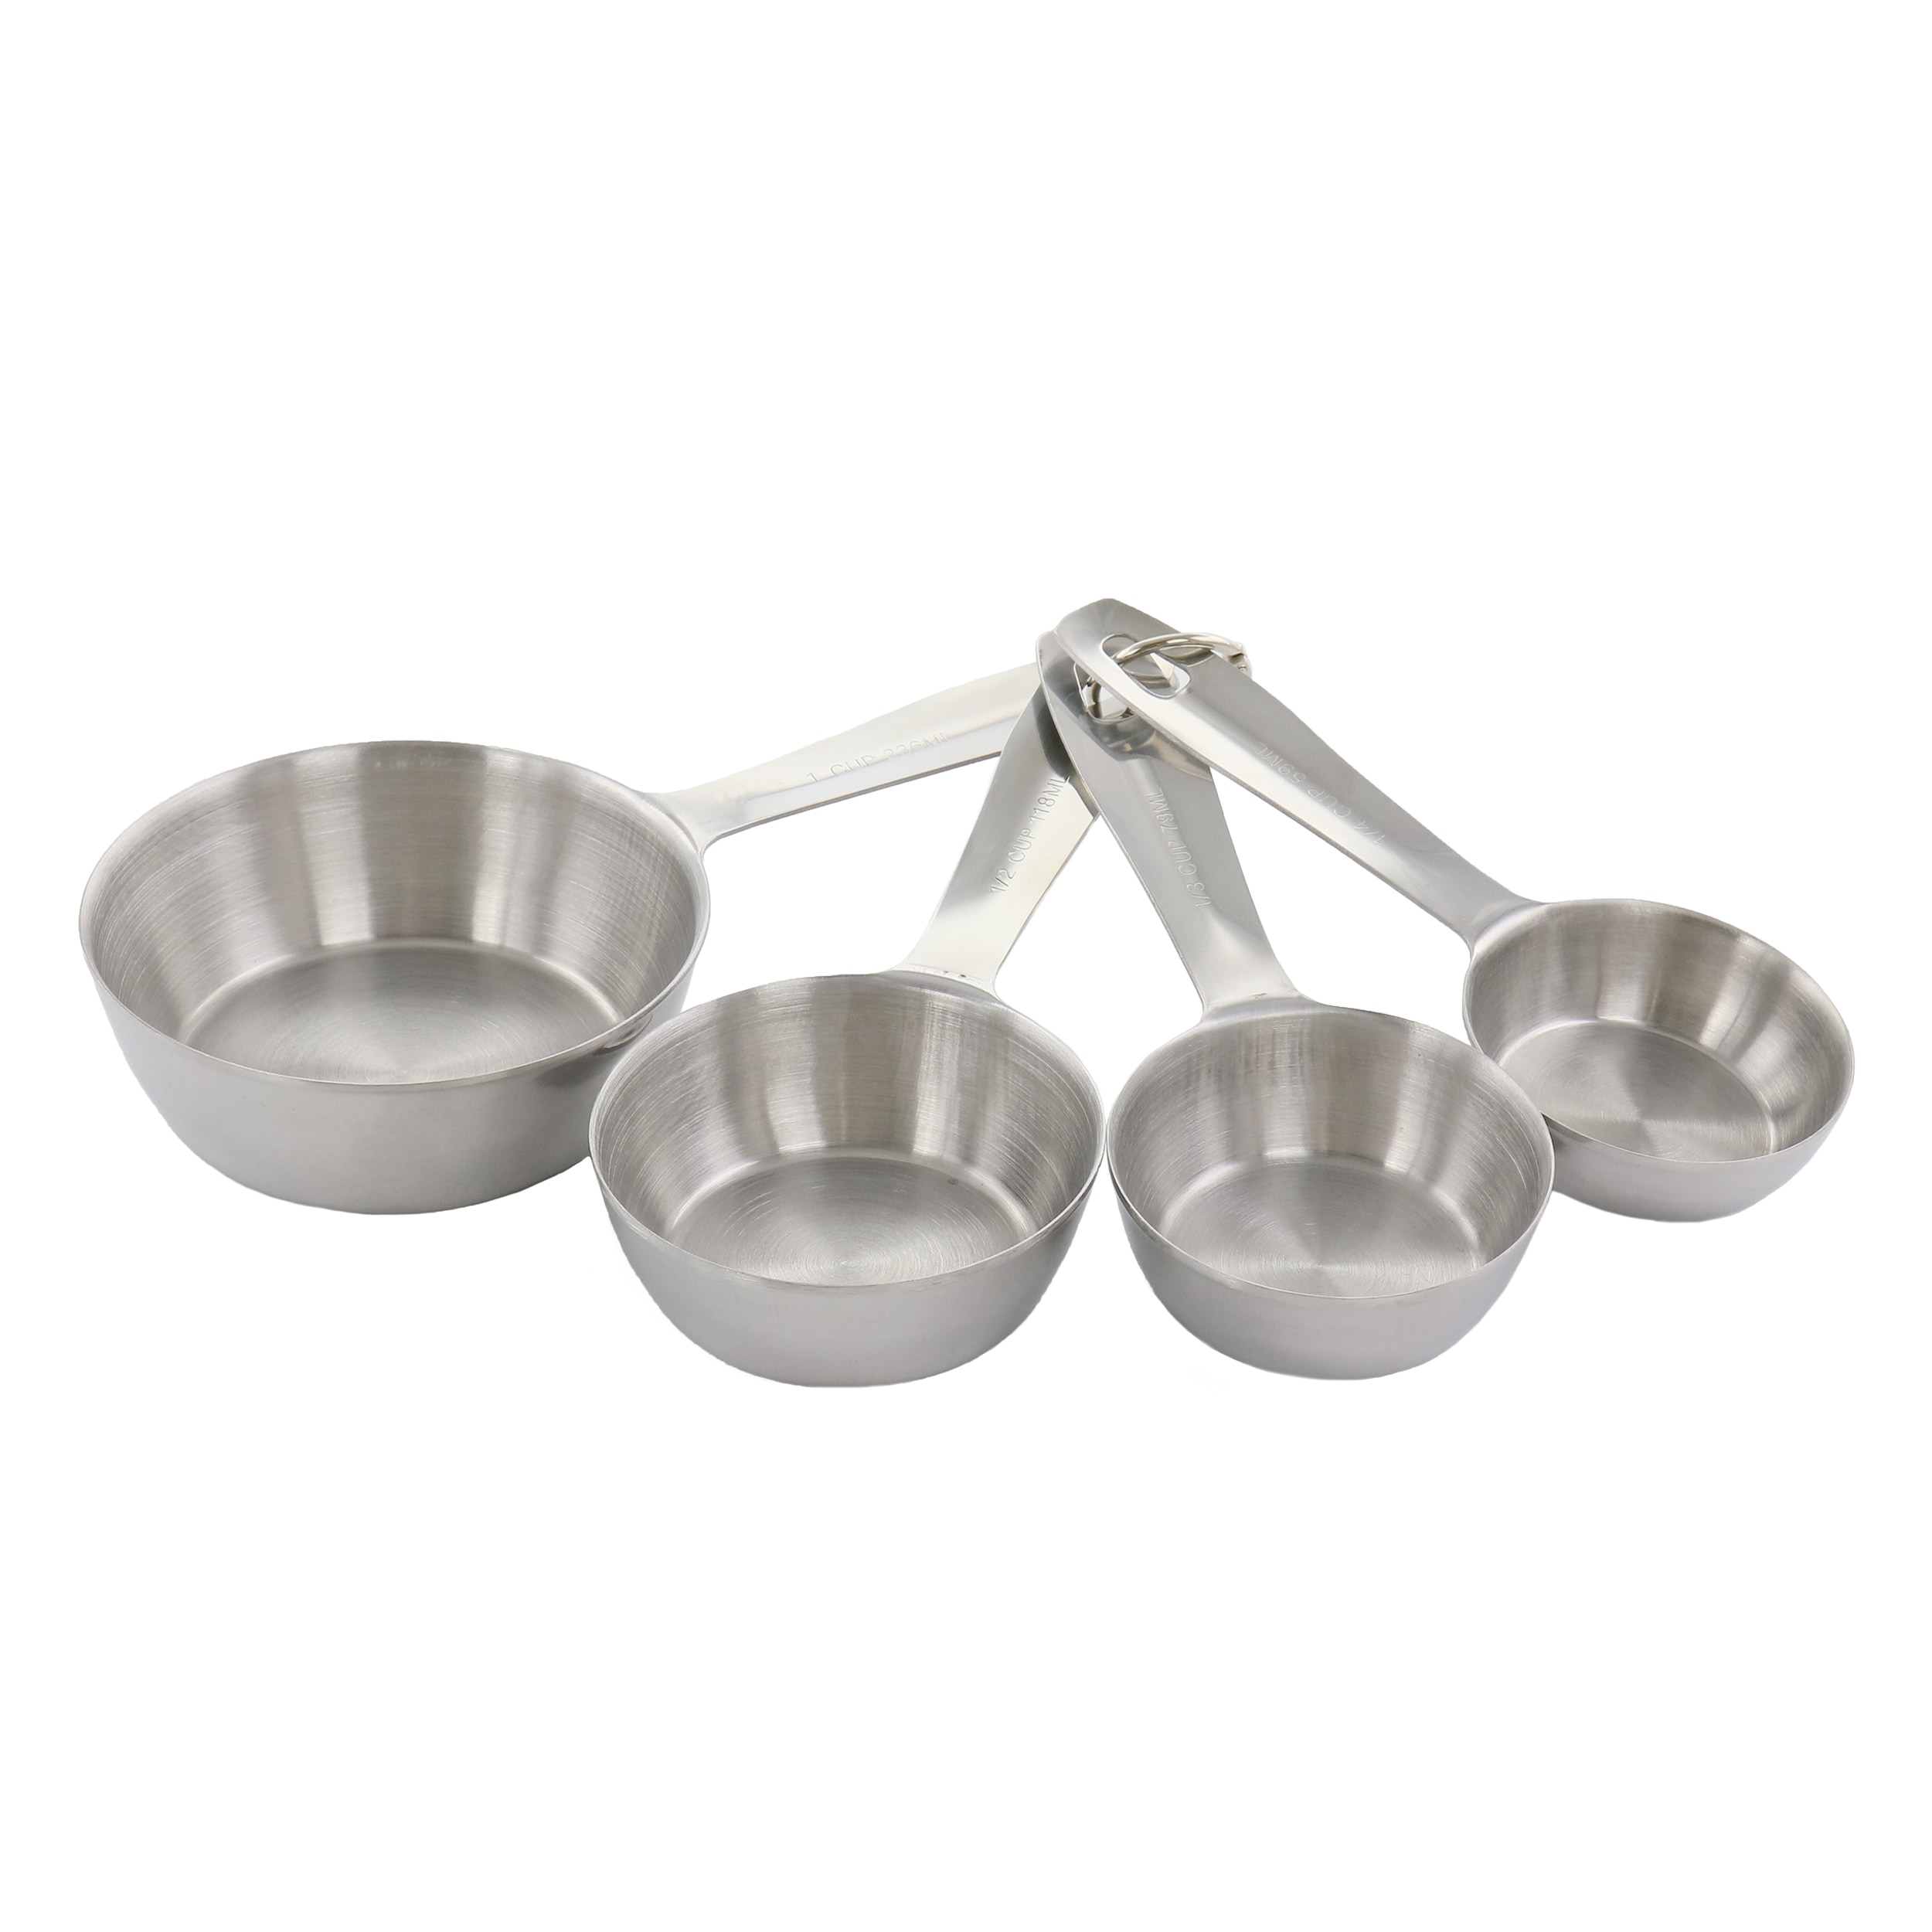 4 Sabatier Stainless Steel Measuring Cups. 3/4 Cup, 1/2 Cup, 1/3 Cup, 1/4  Cup.